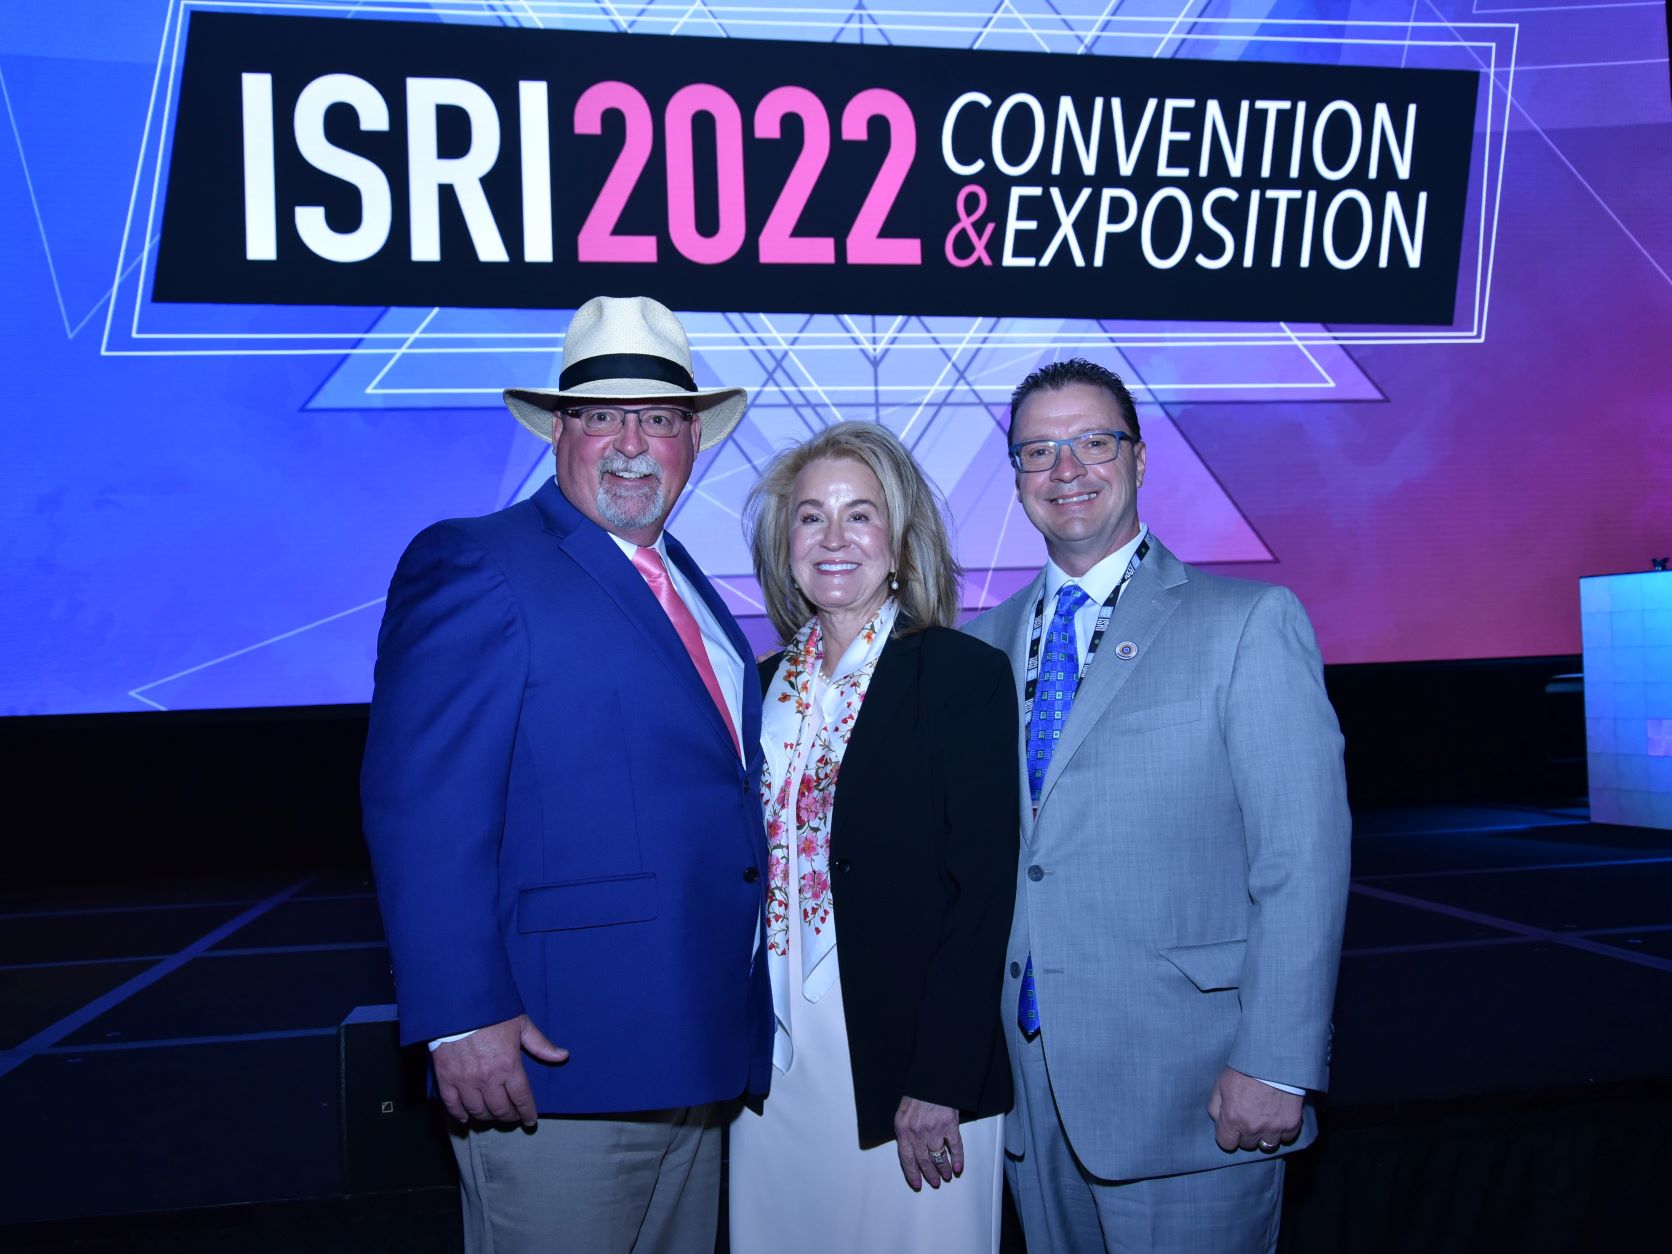 A View from the Chair: Two ISRI Leaders Share Their Thoughts